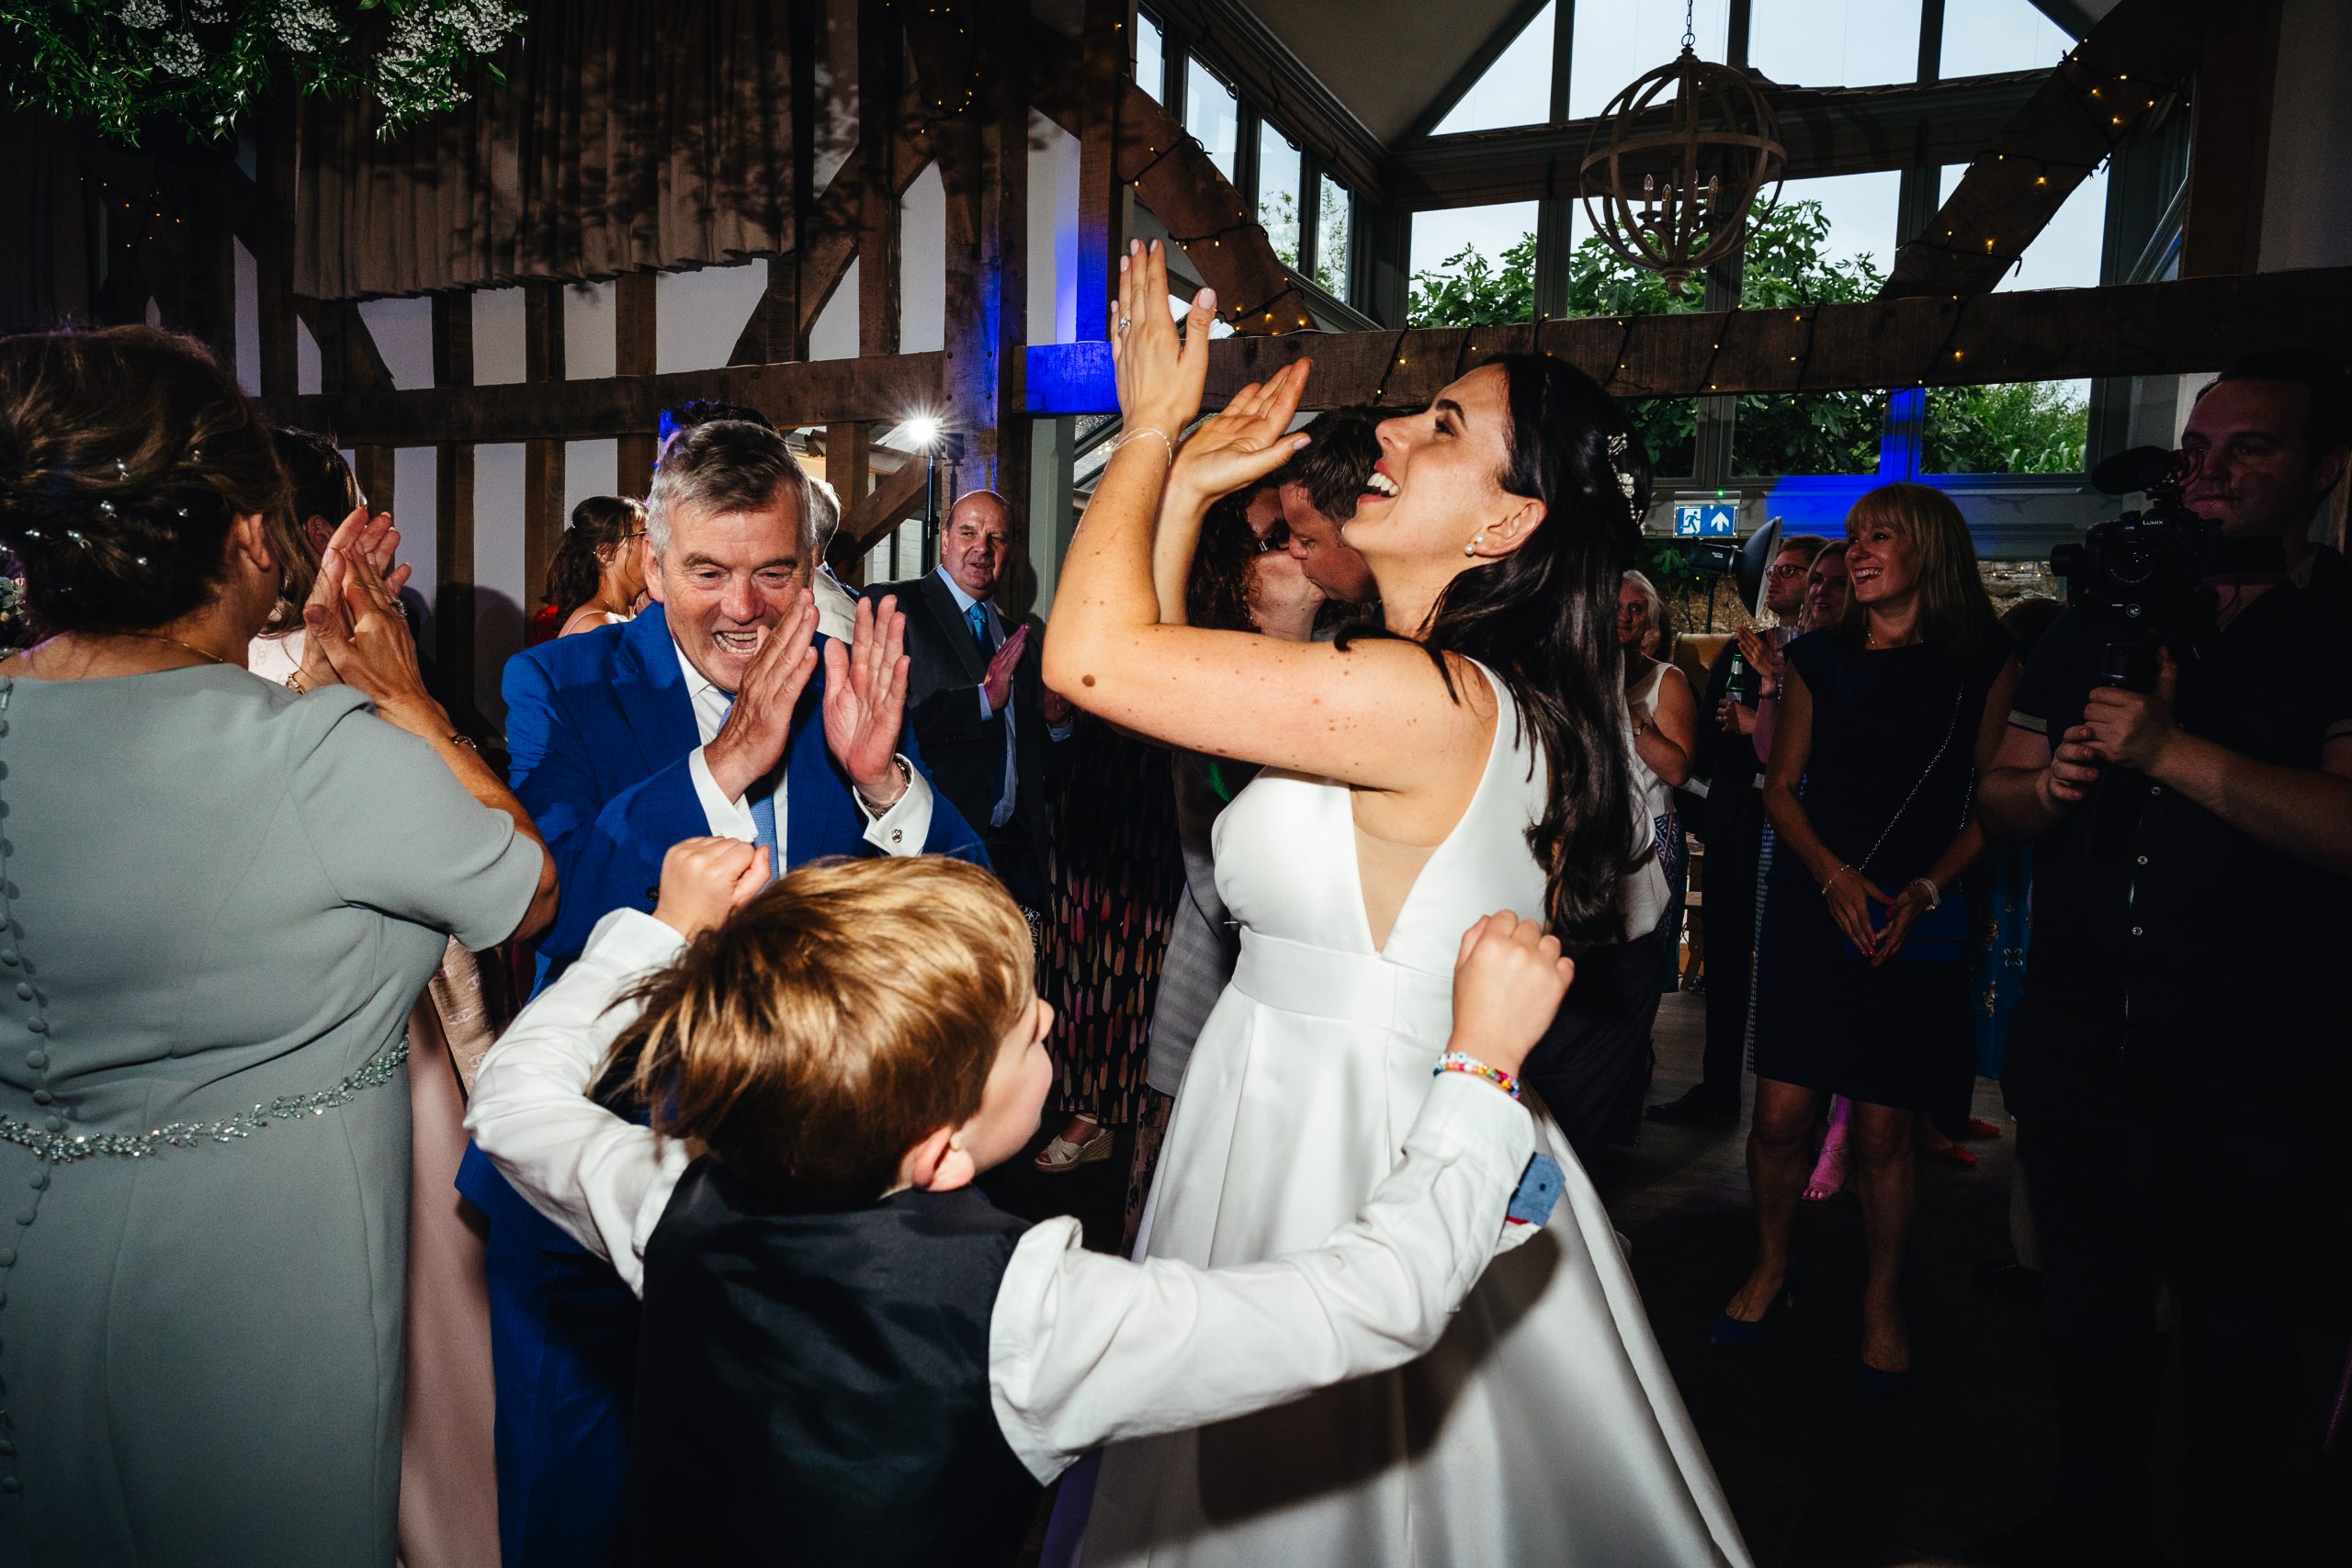 Second wedding photographer capturing different angles on the dancefloor